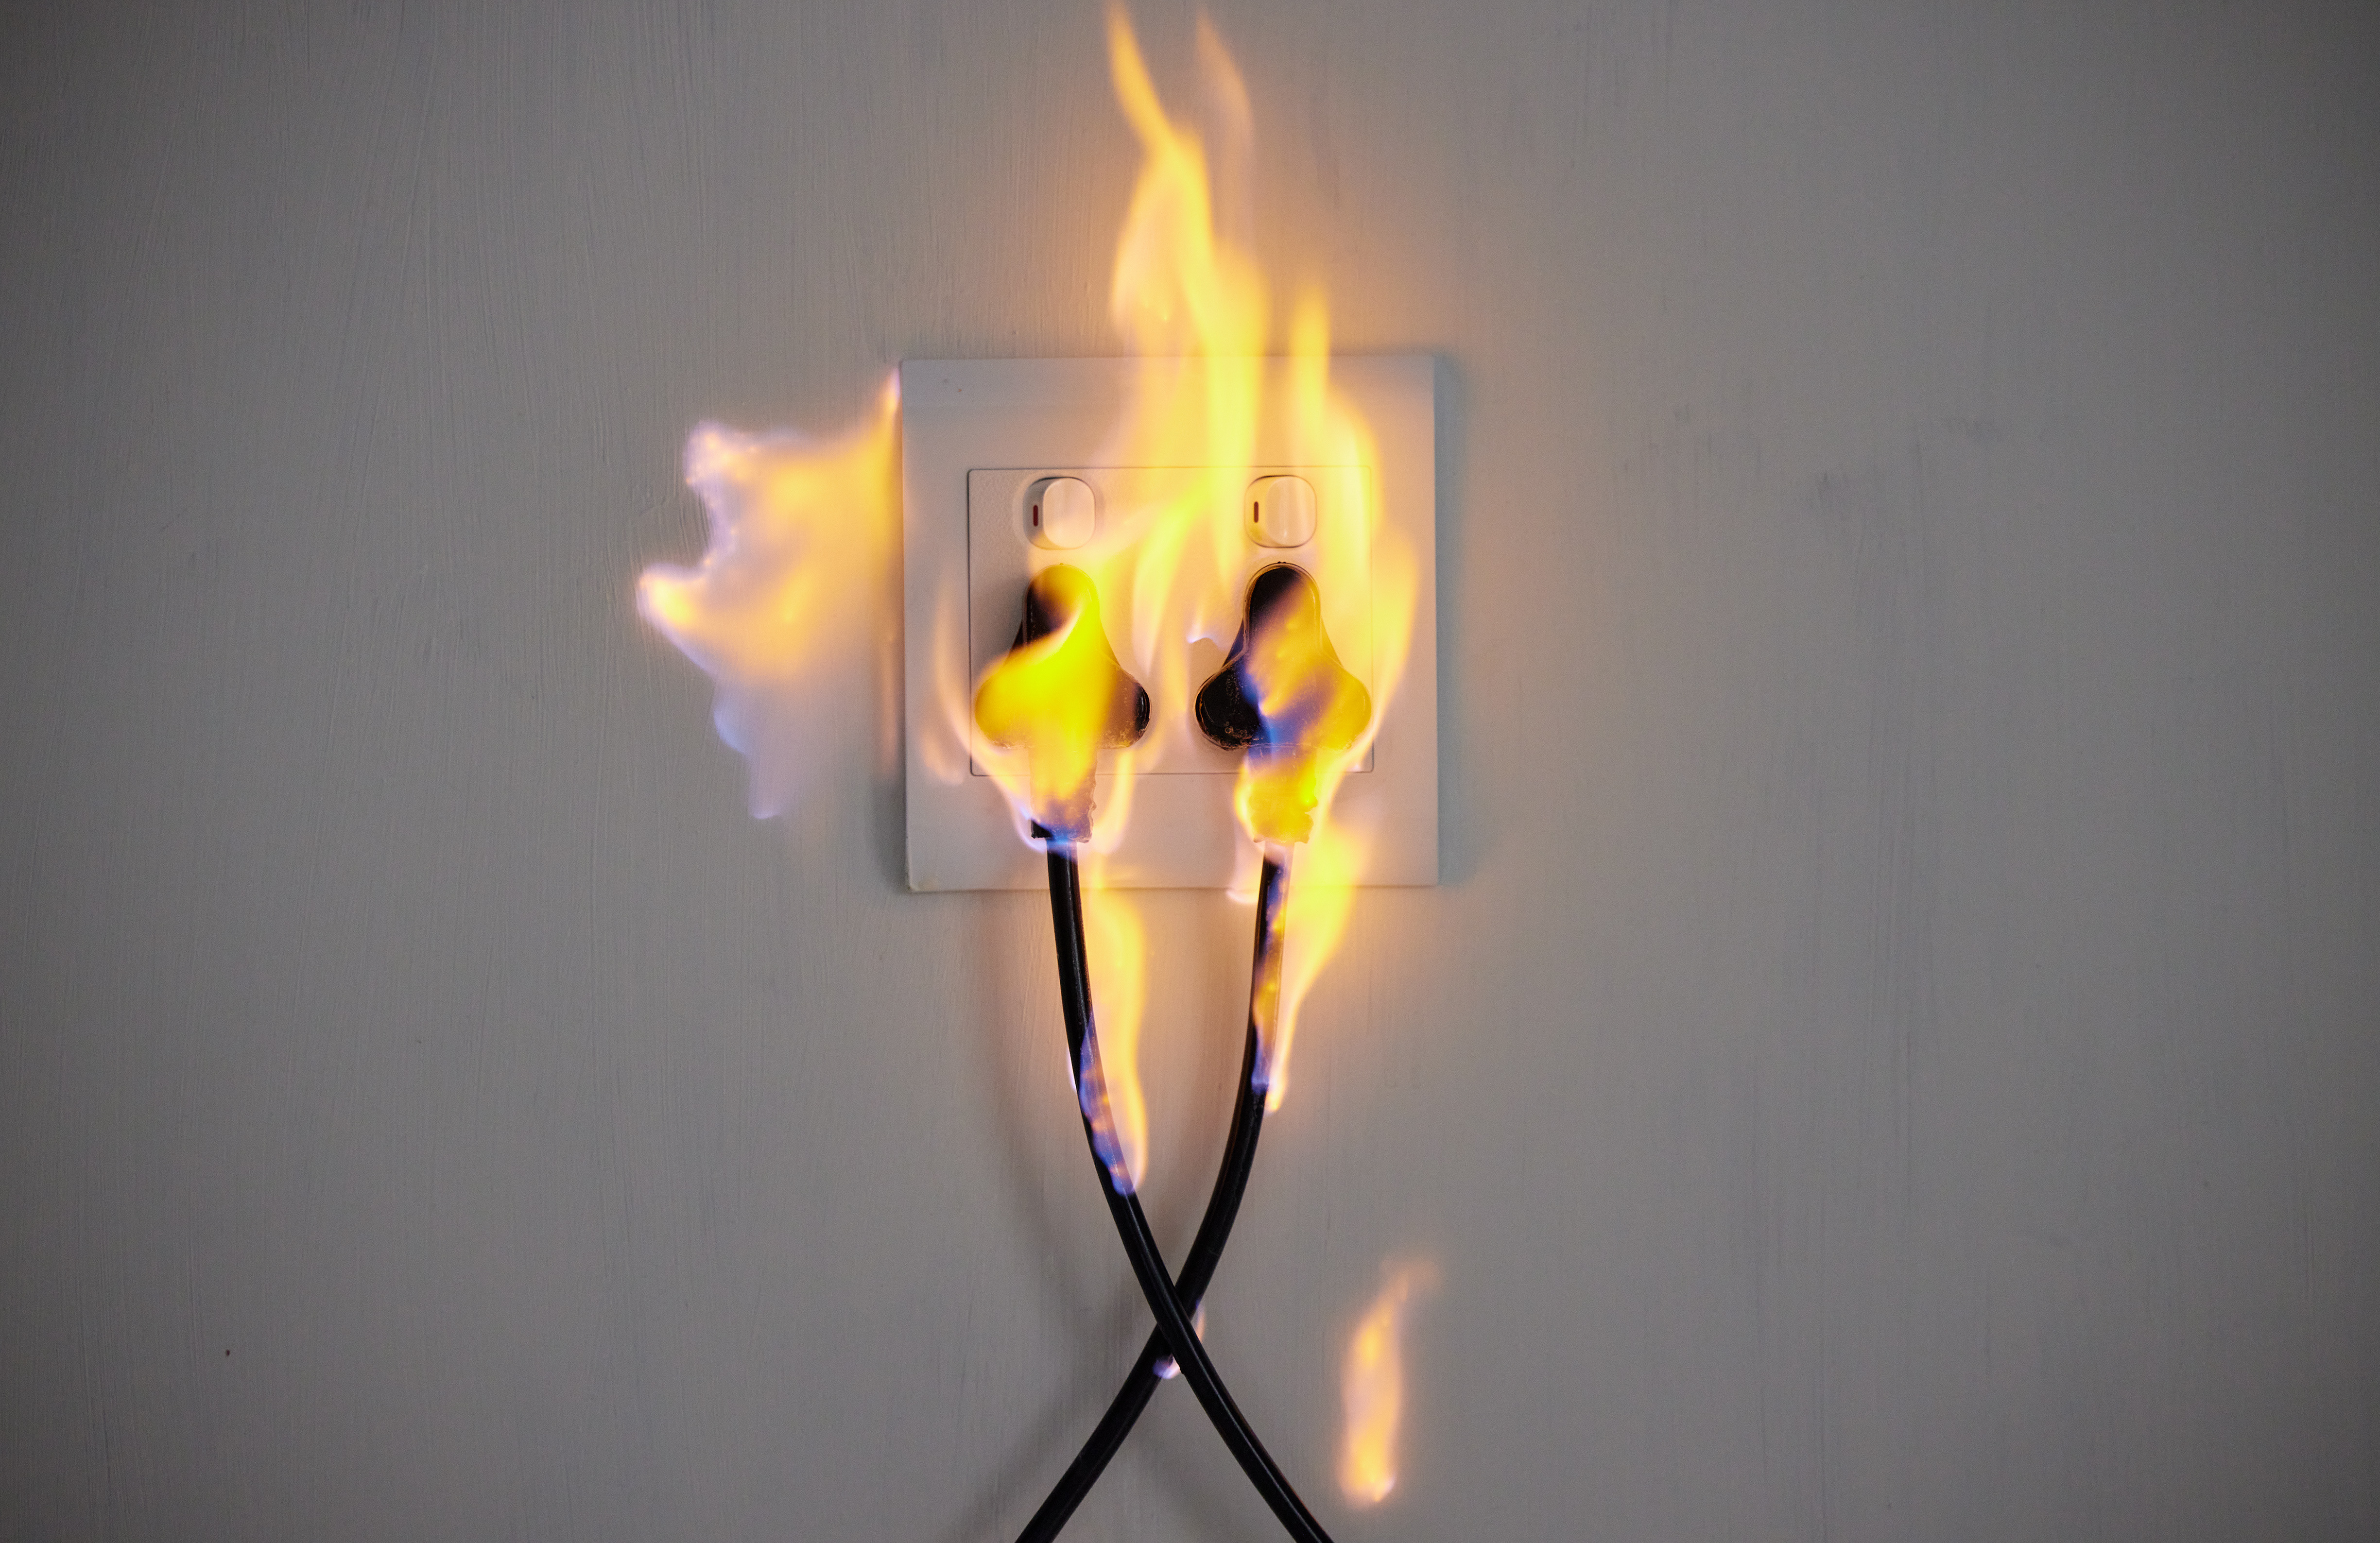 47561446_electrical-fire-two-plugs-in-a-wall-socket-catching-fire